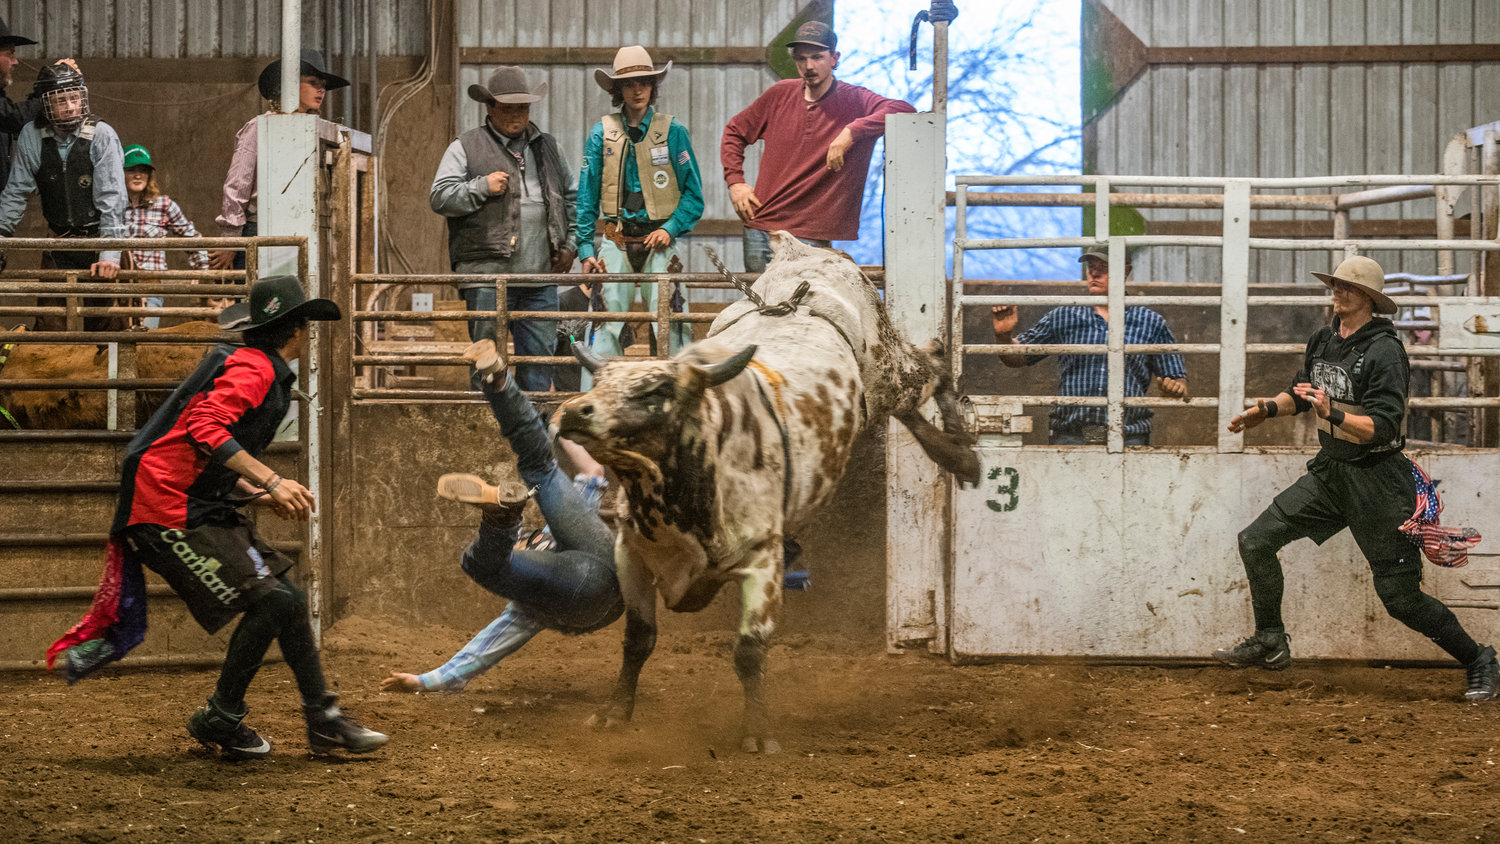 A rider braces for impact as he loses grip during a Lazy HK Bar Rodeo Winter Series event Saturday in Silver Creek.